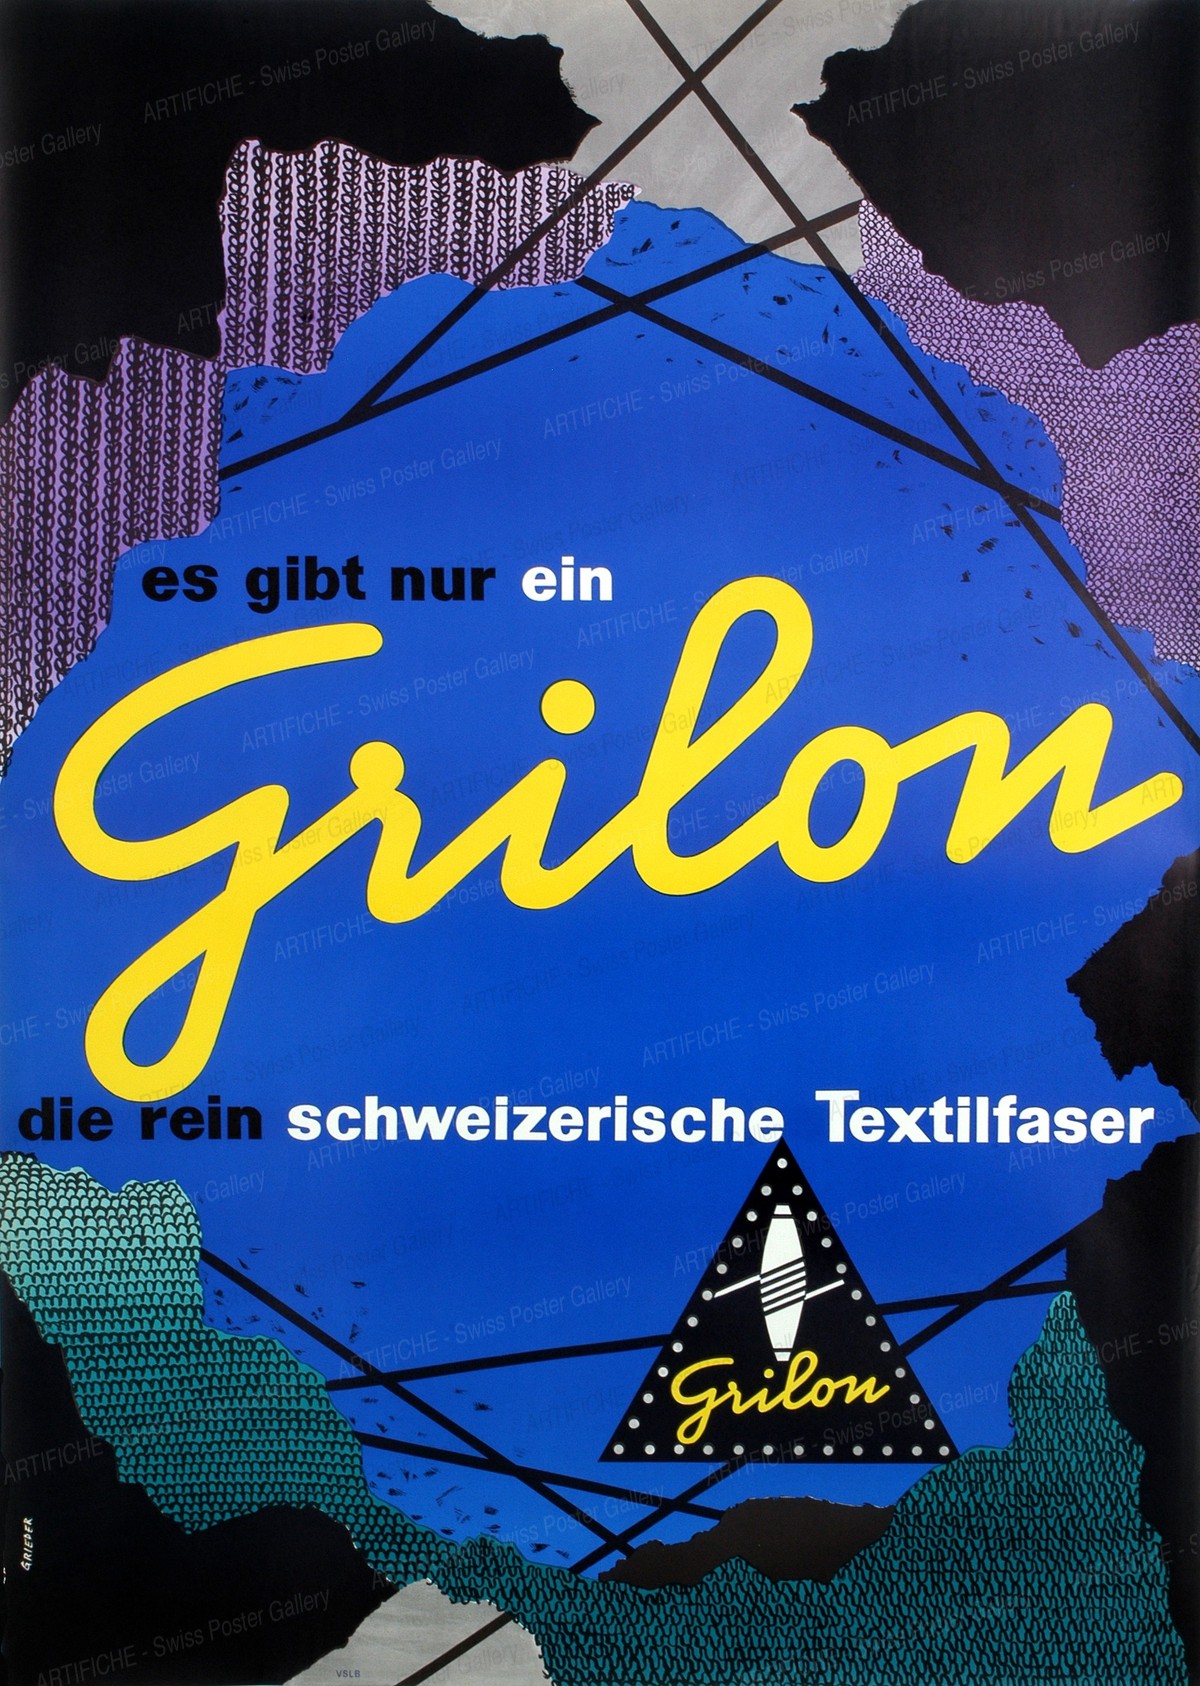 … there is only one Grilon – swiss textile, Walter Grieder